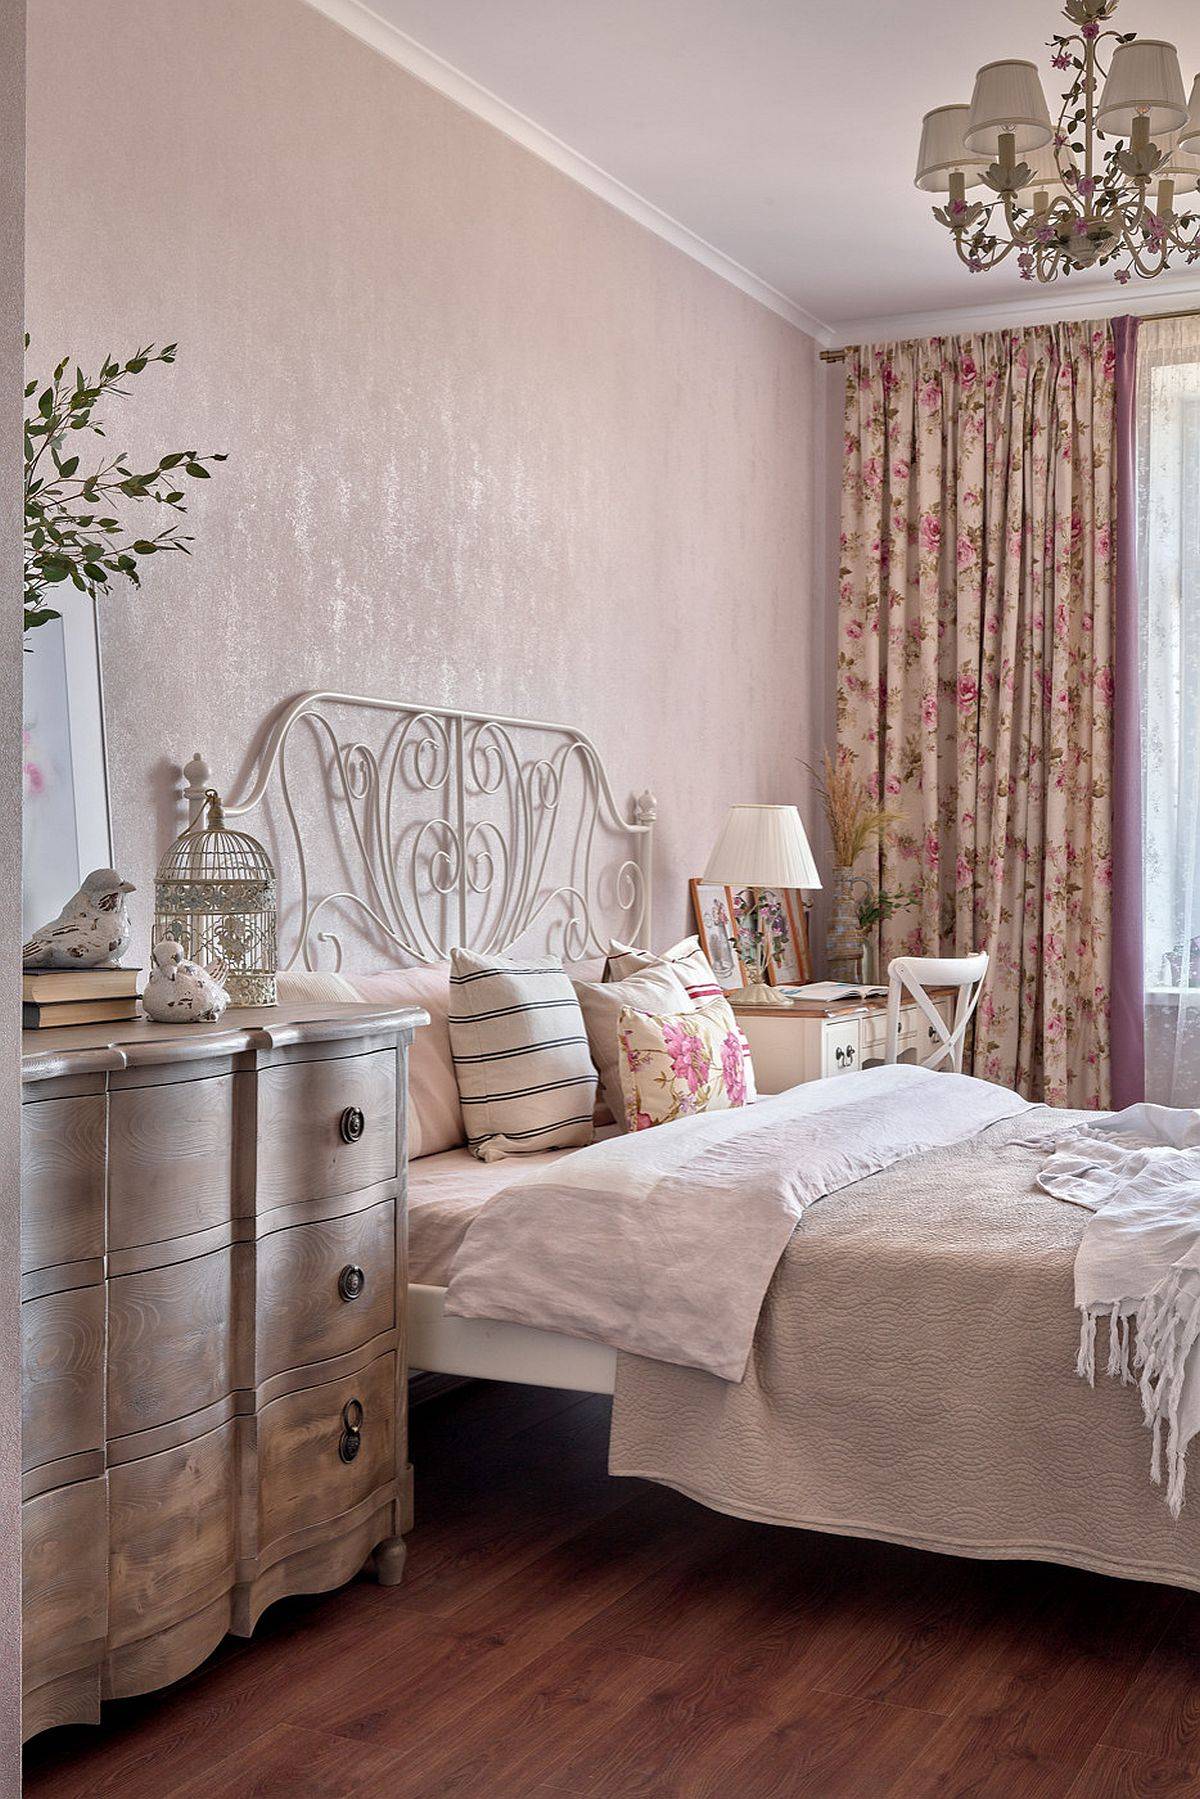 Pastel-hues-and-floral-patterns-accentuate-the-shabby-chic-appeal-of-this-modern-bedroom-85050